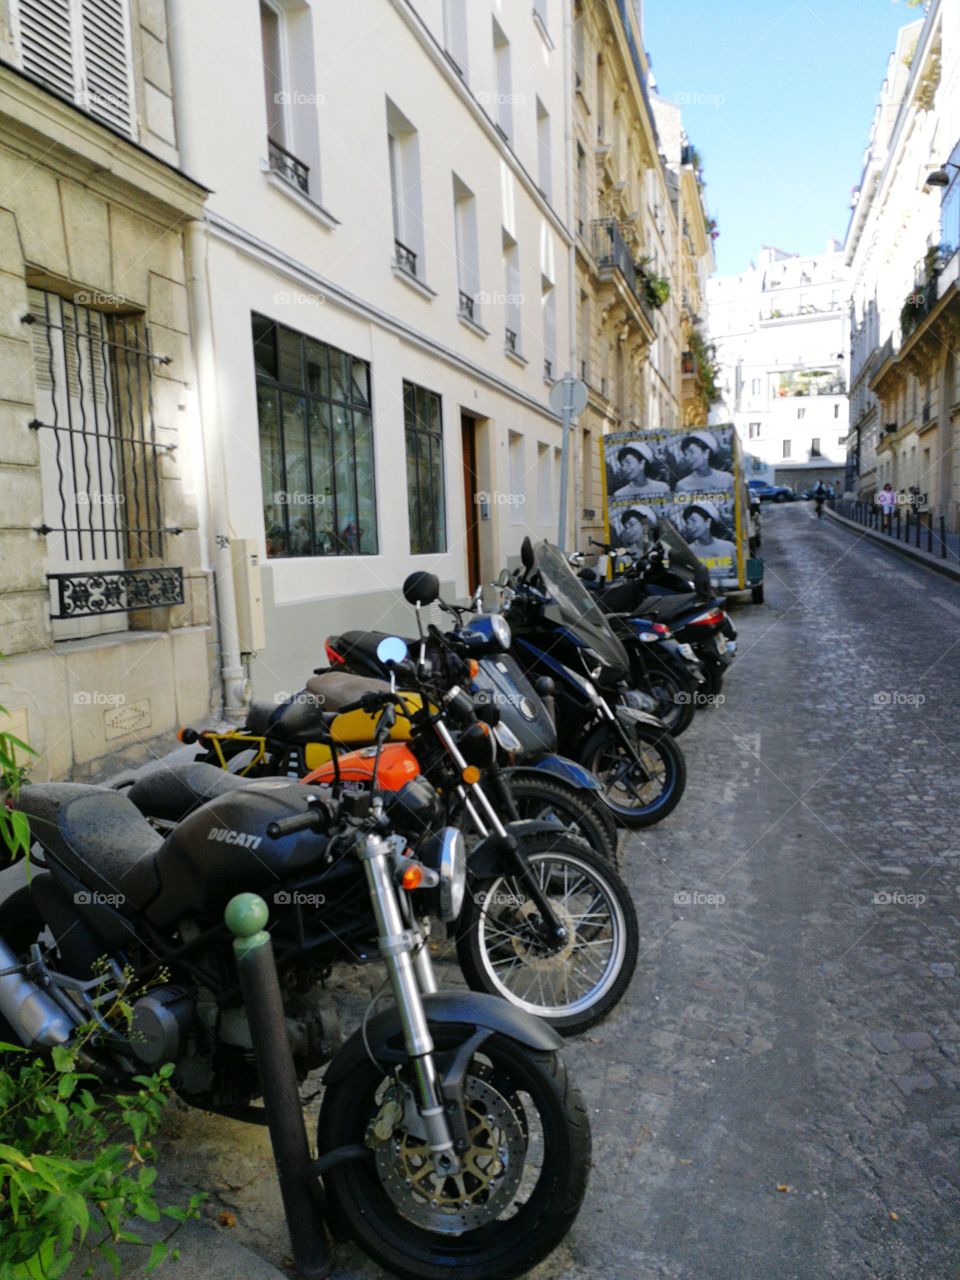 motorcycles ranged in the 18th arrondissement in Paris